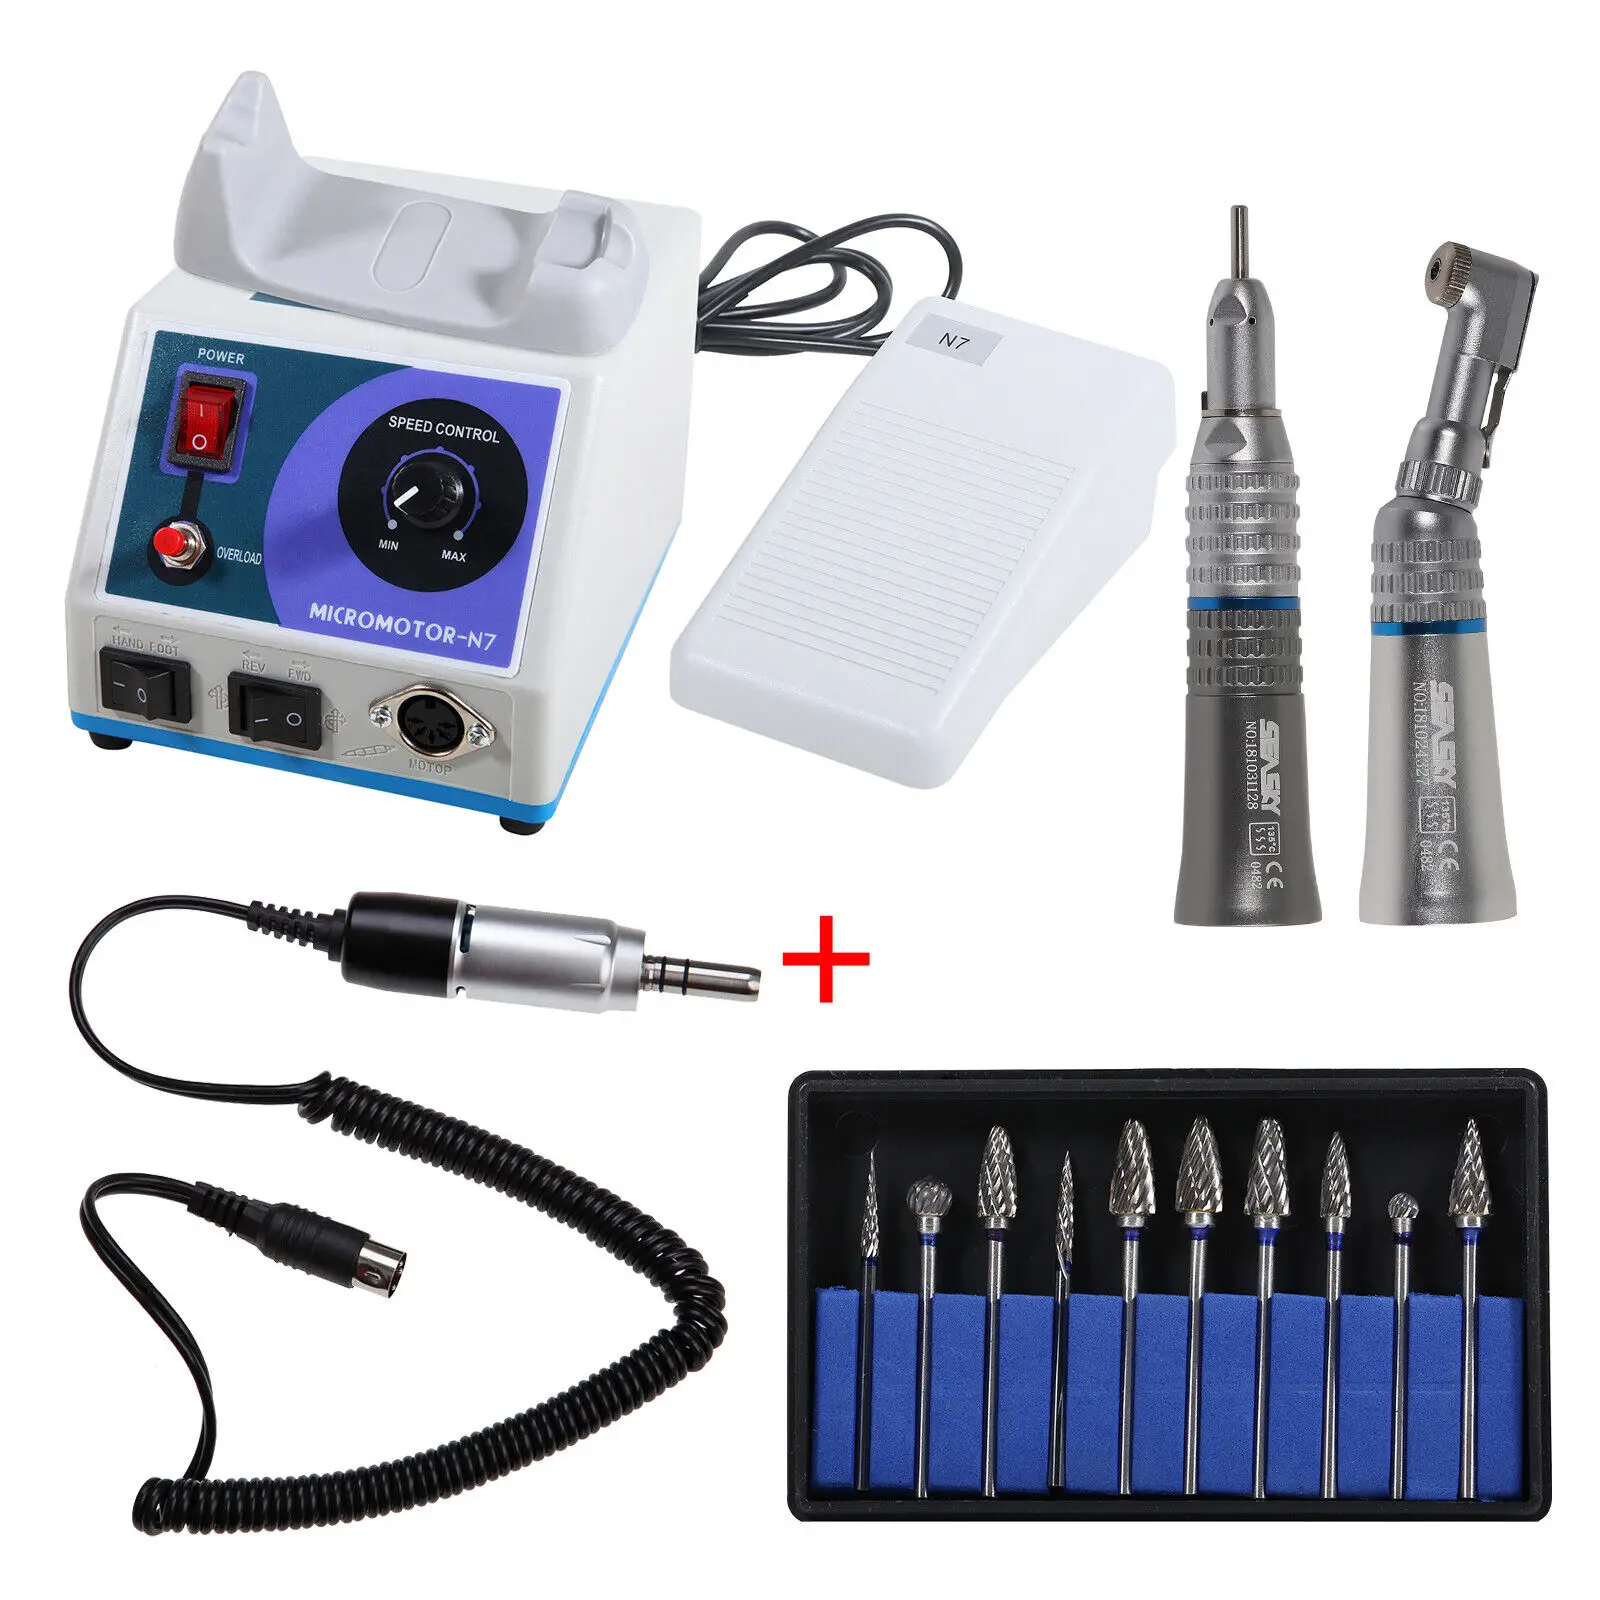 

Dental Marathon Electric Polishing Micromotor N7 35K RPM +Low Speed Contra Angle Straight Nosecone Handpiece Fit Nsk+10 Drills